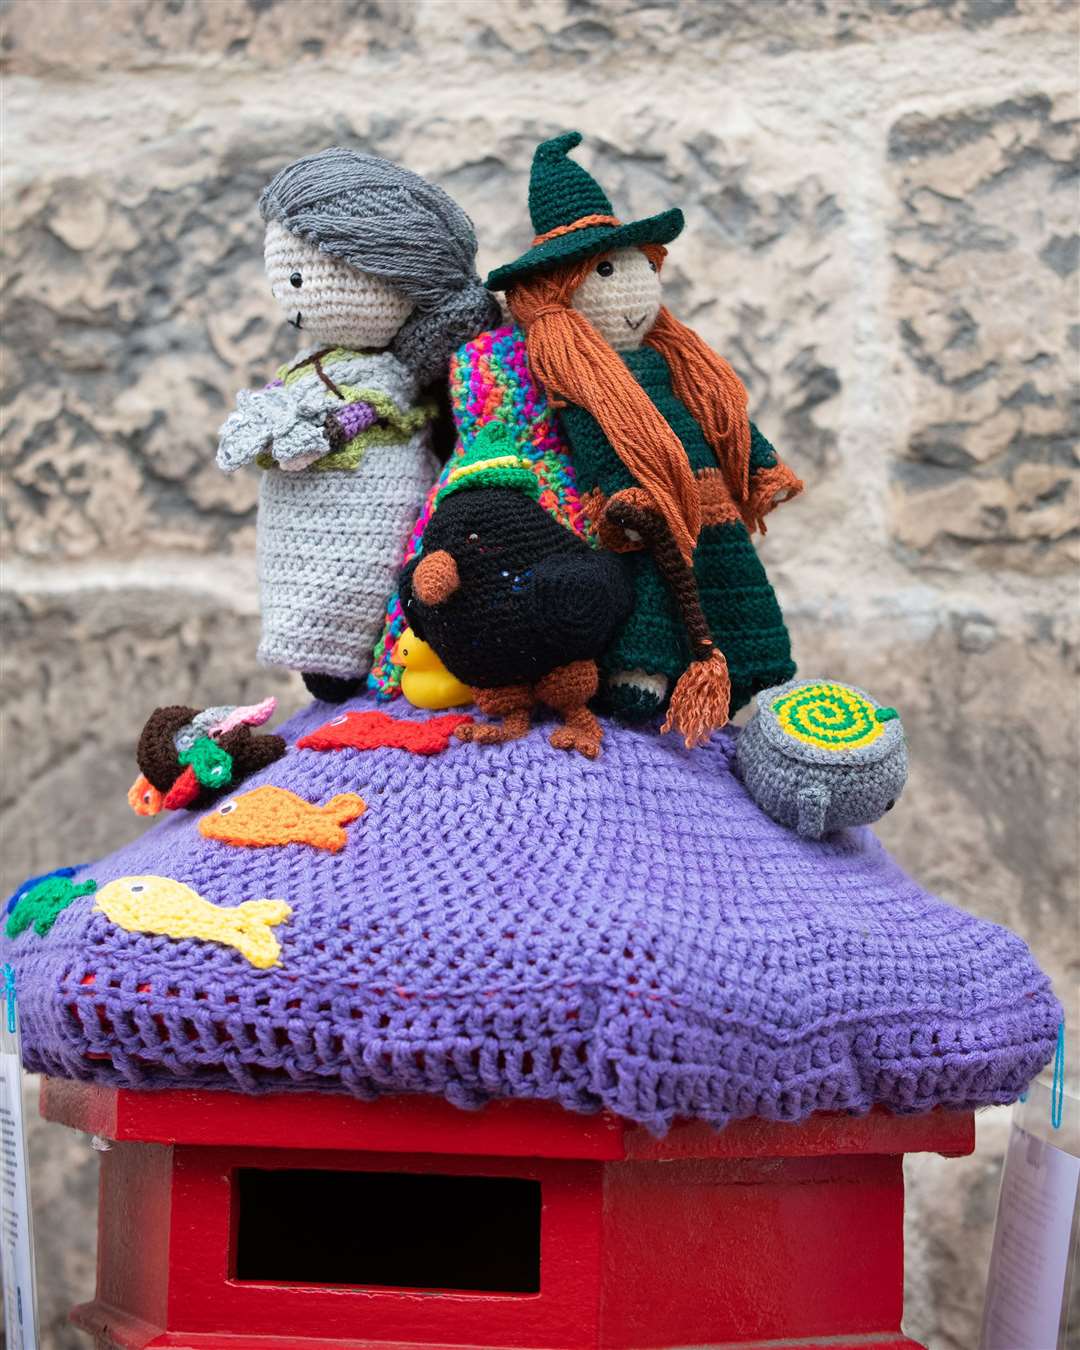 The Witch of Auldearn features in the handiwork of the Nairn yarnbombers.